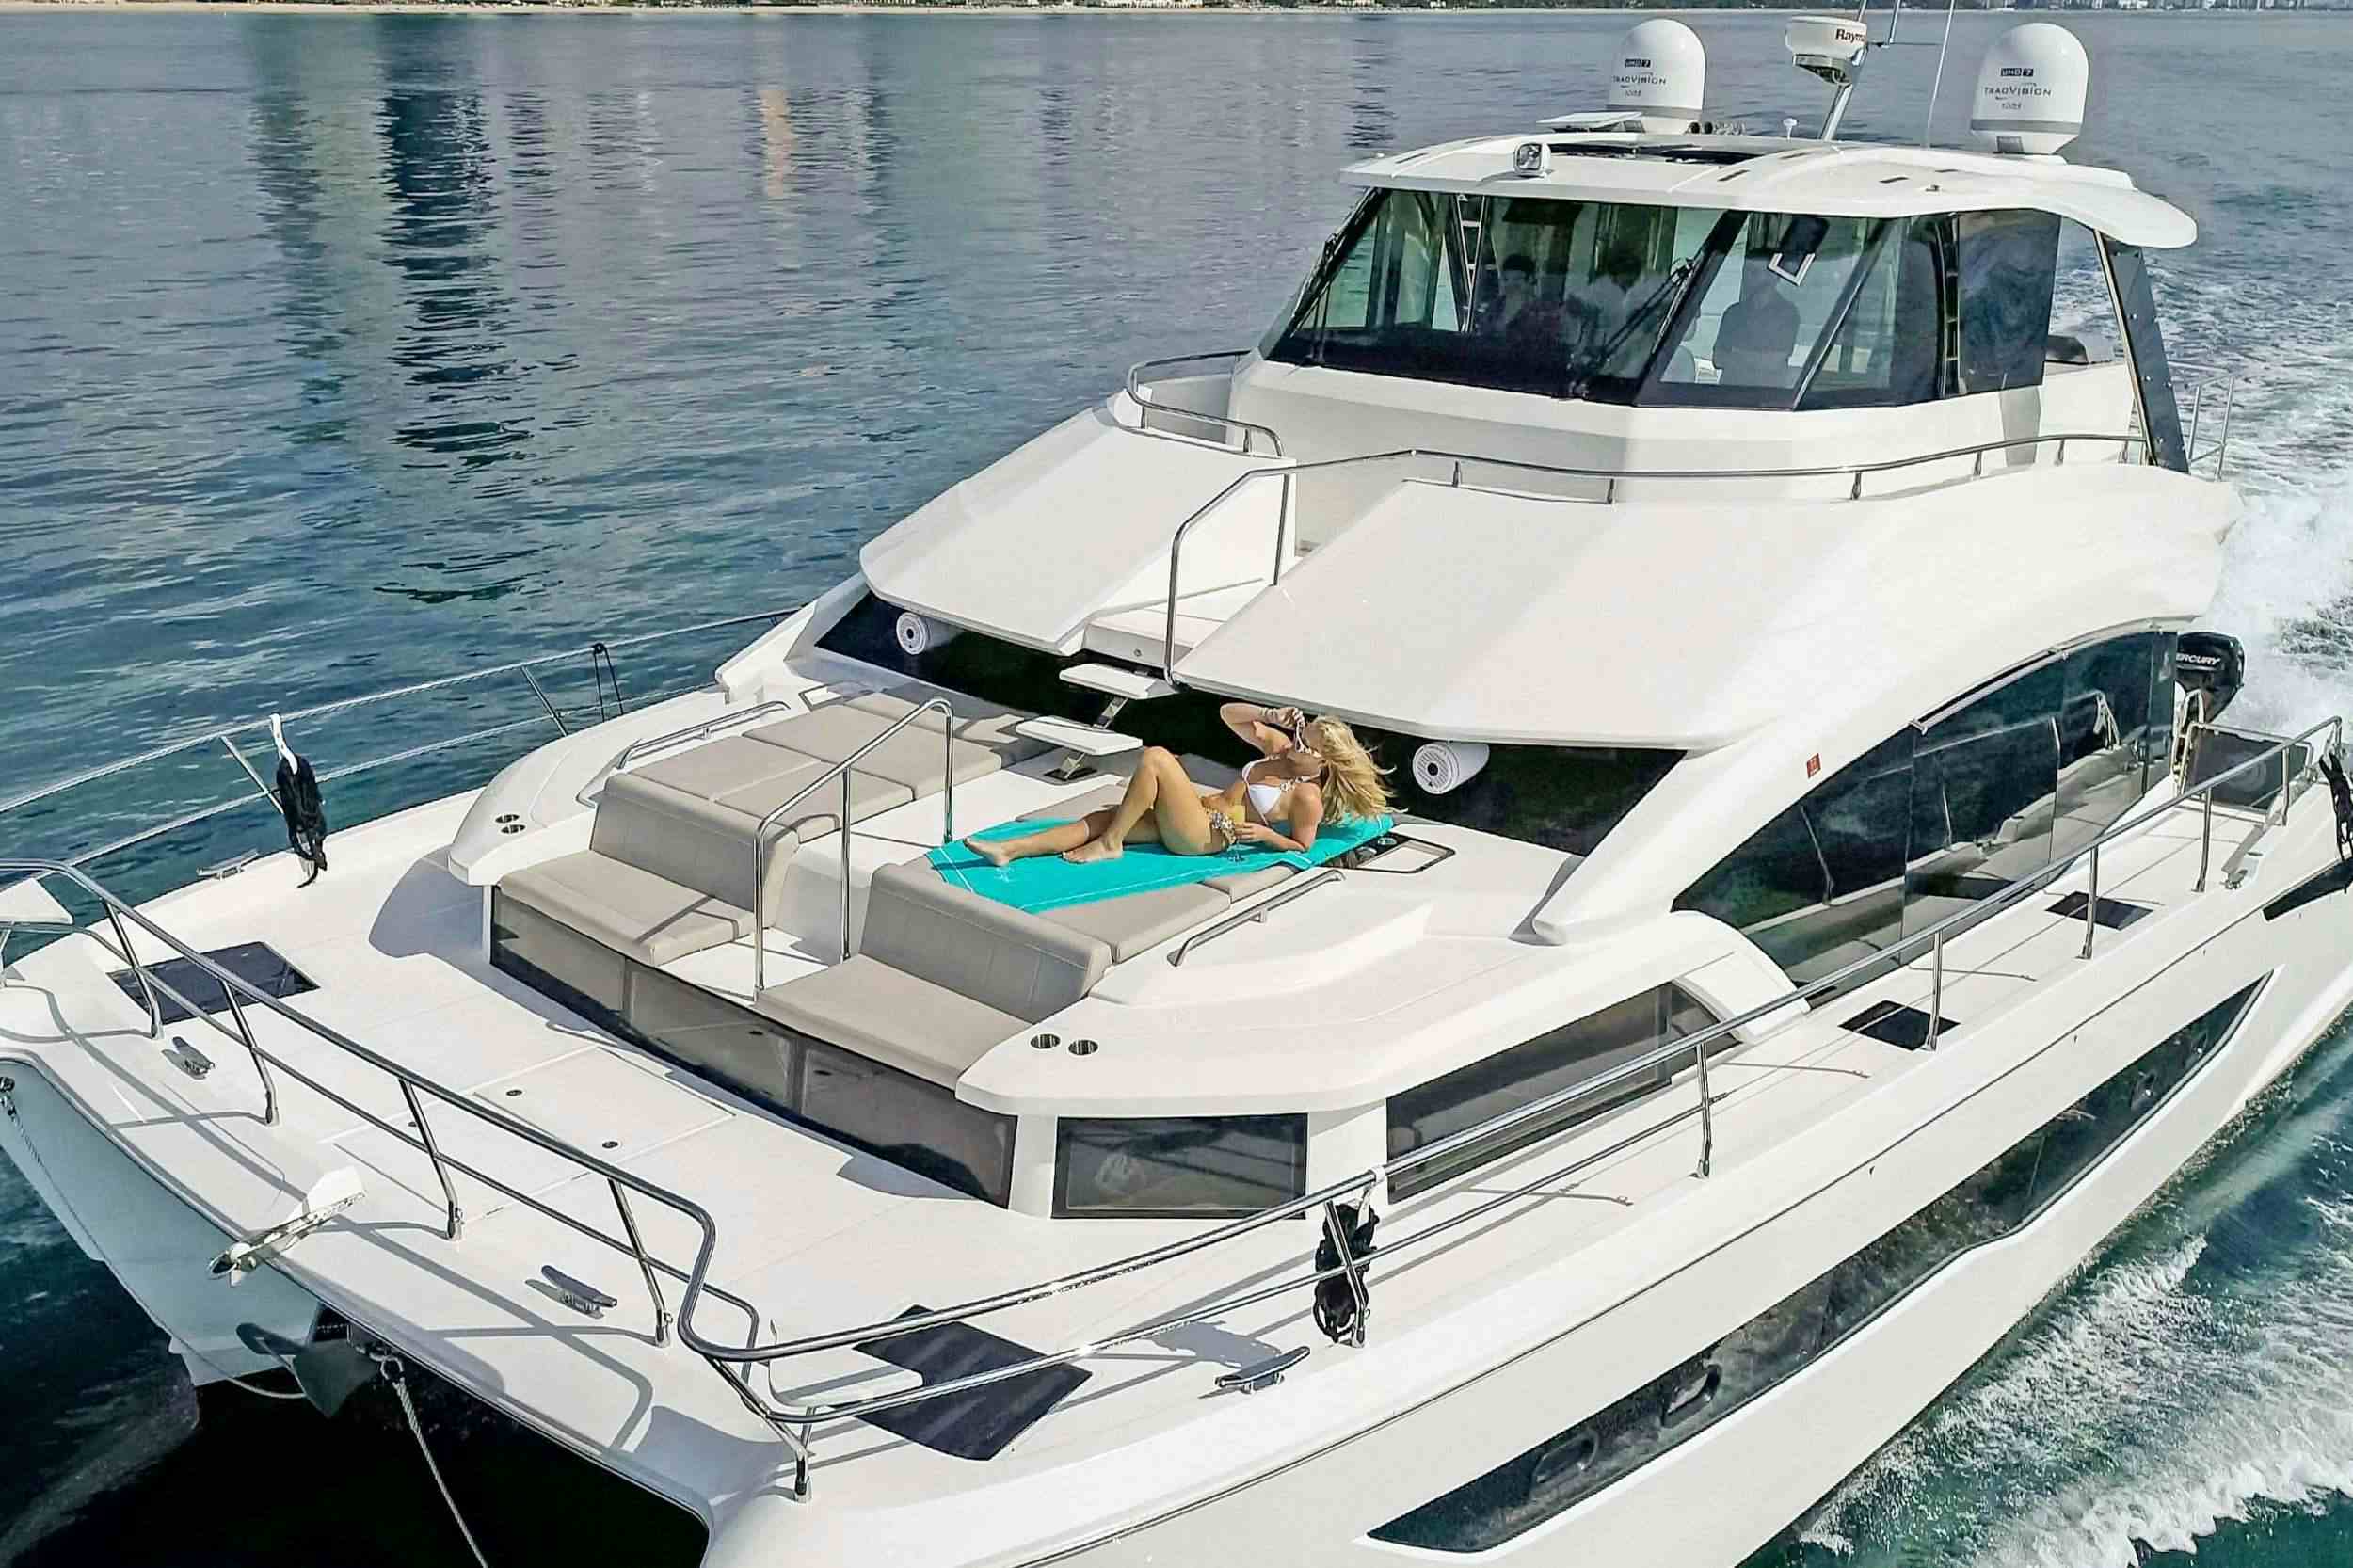 Sea Angel - Yacht Charter Fort Lauderdale & Boat hire in Florida 1